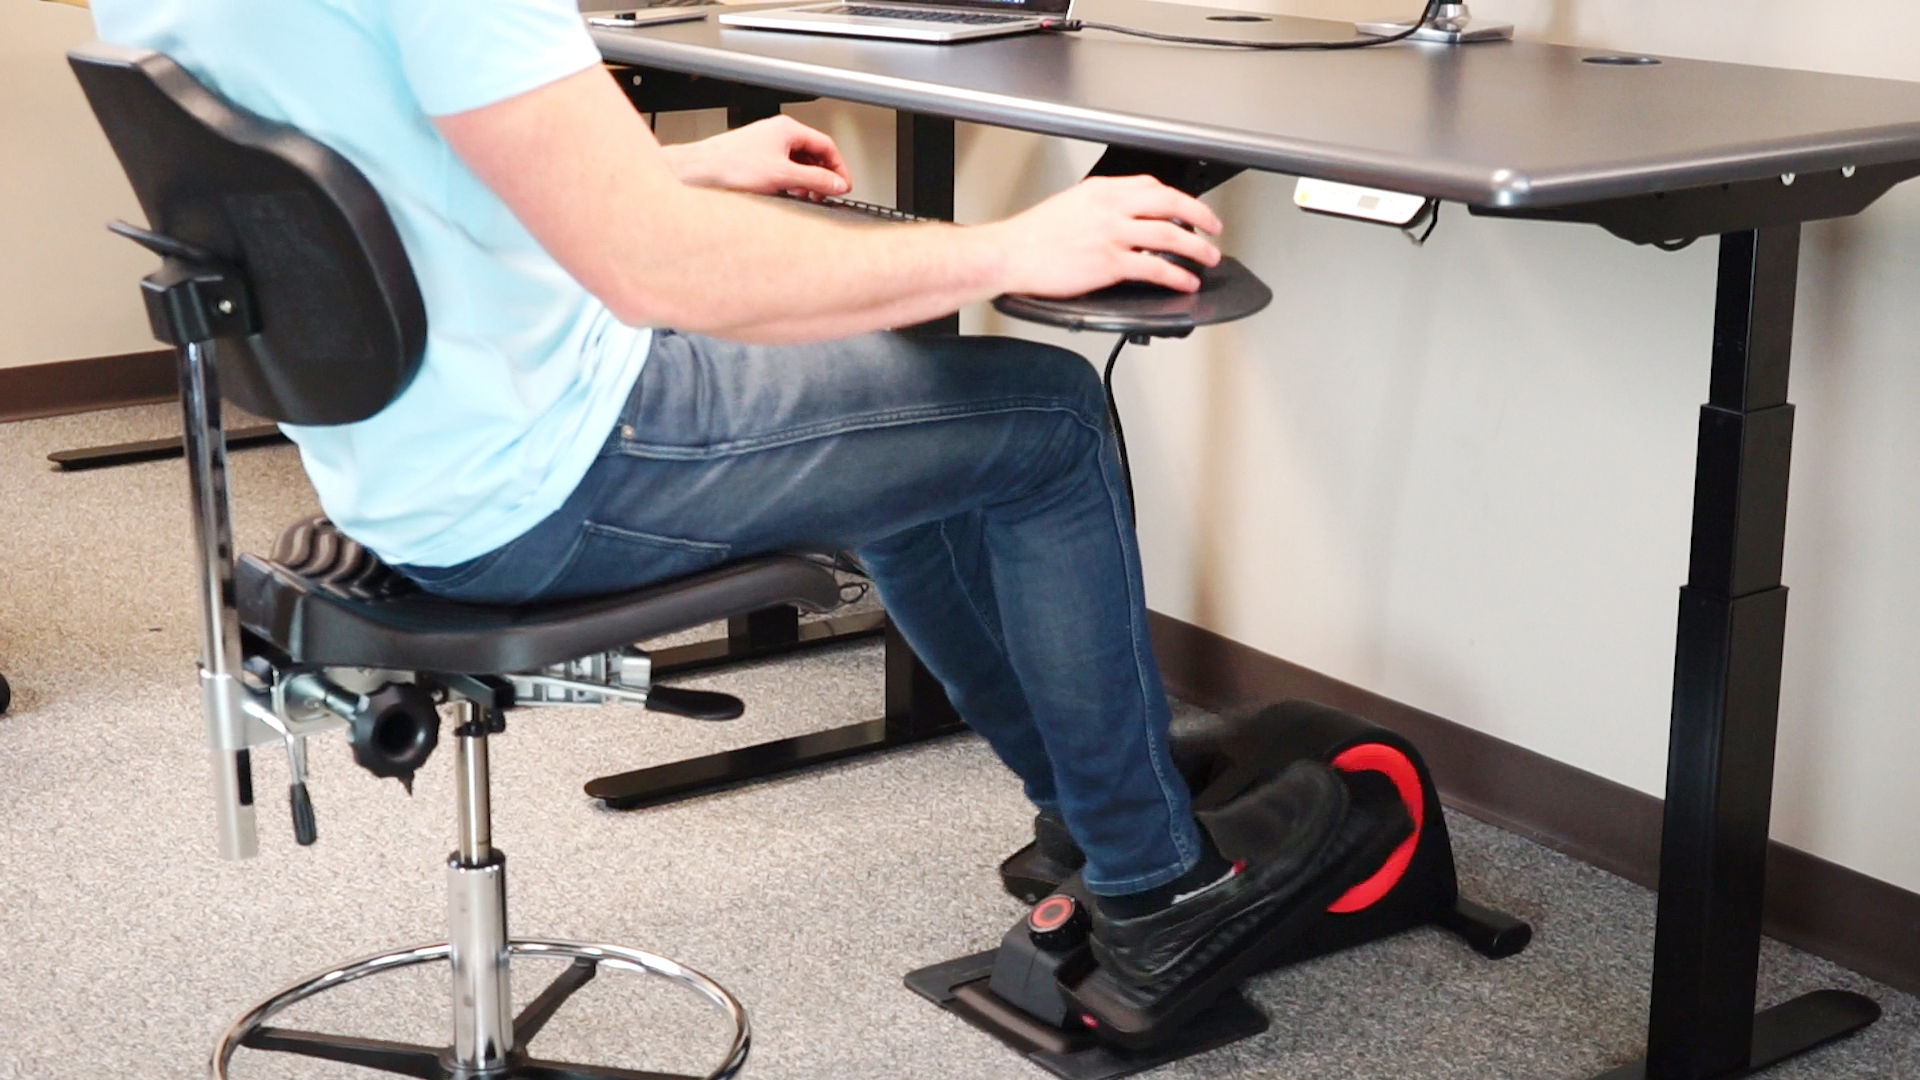 How to Set up an Ergonomically Proper Desk Cycle